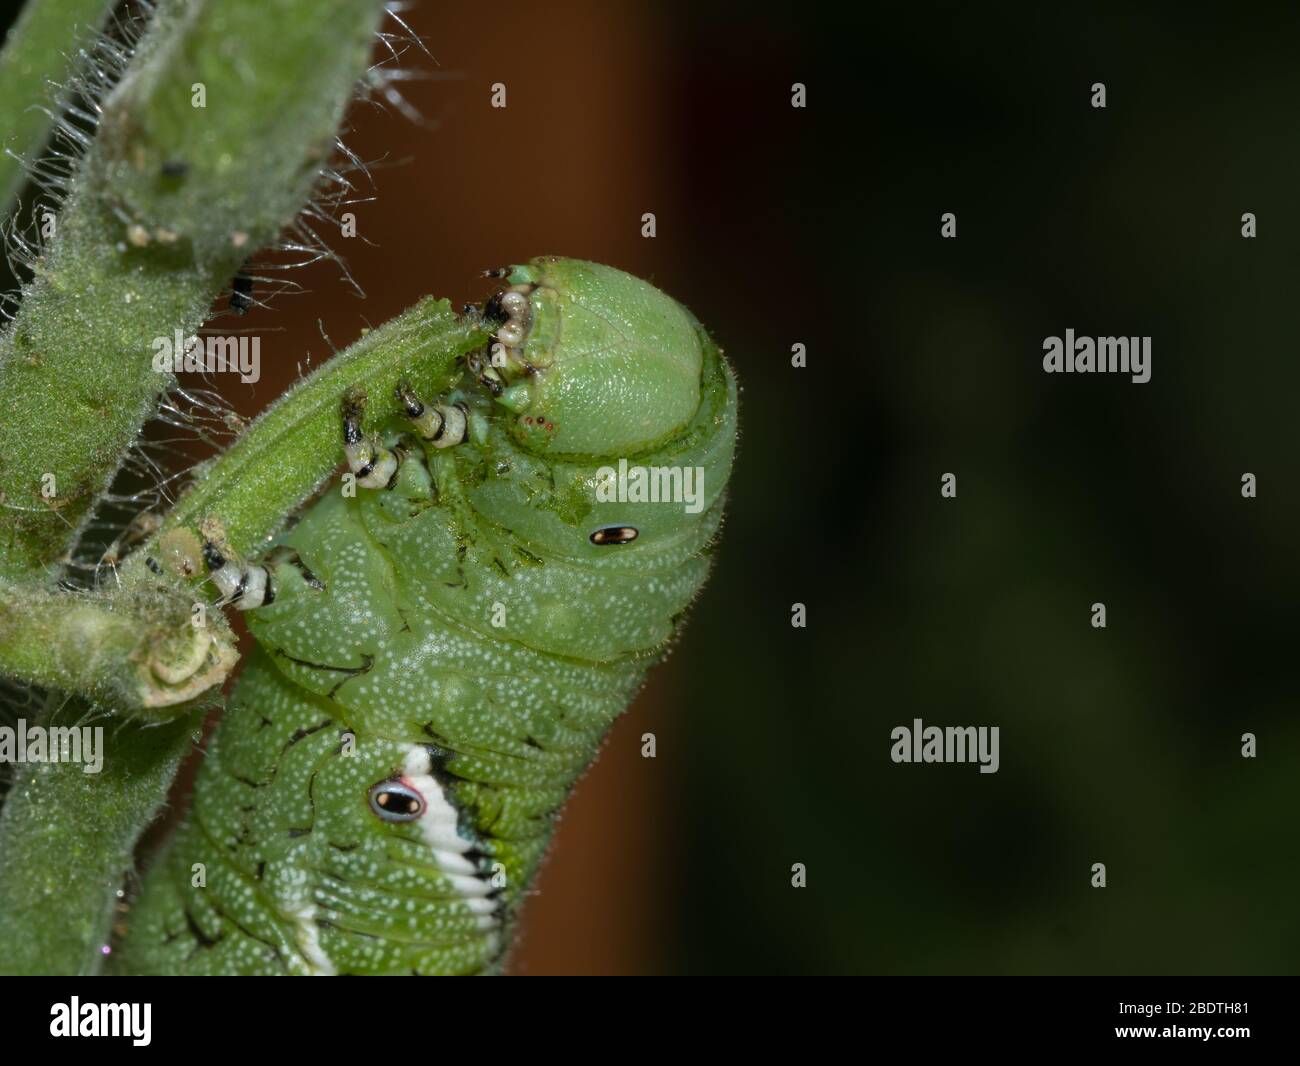 Tomato hornworm, Manduca quinquemaculata, close up showing the caterpillar eating on a tomato plant stalk Stock Photo